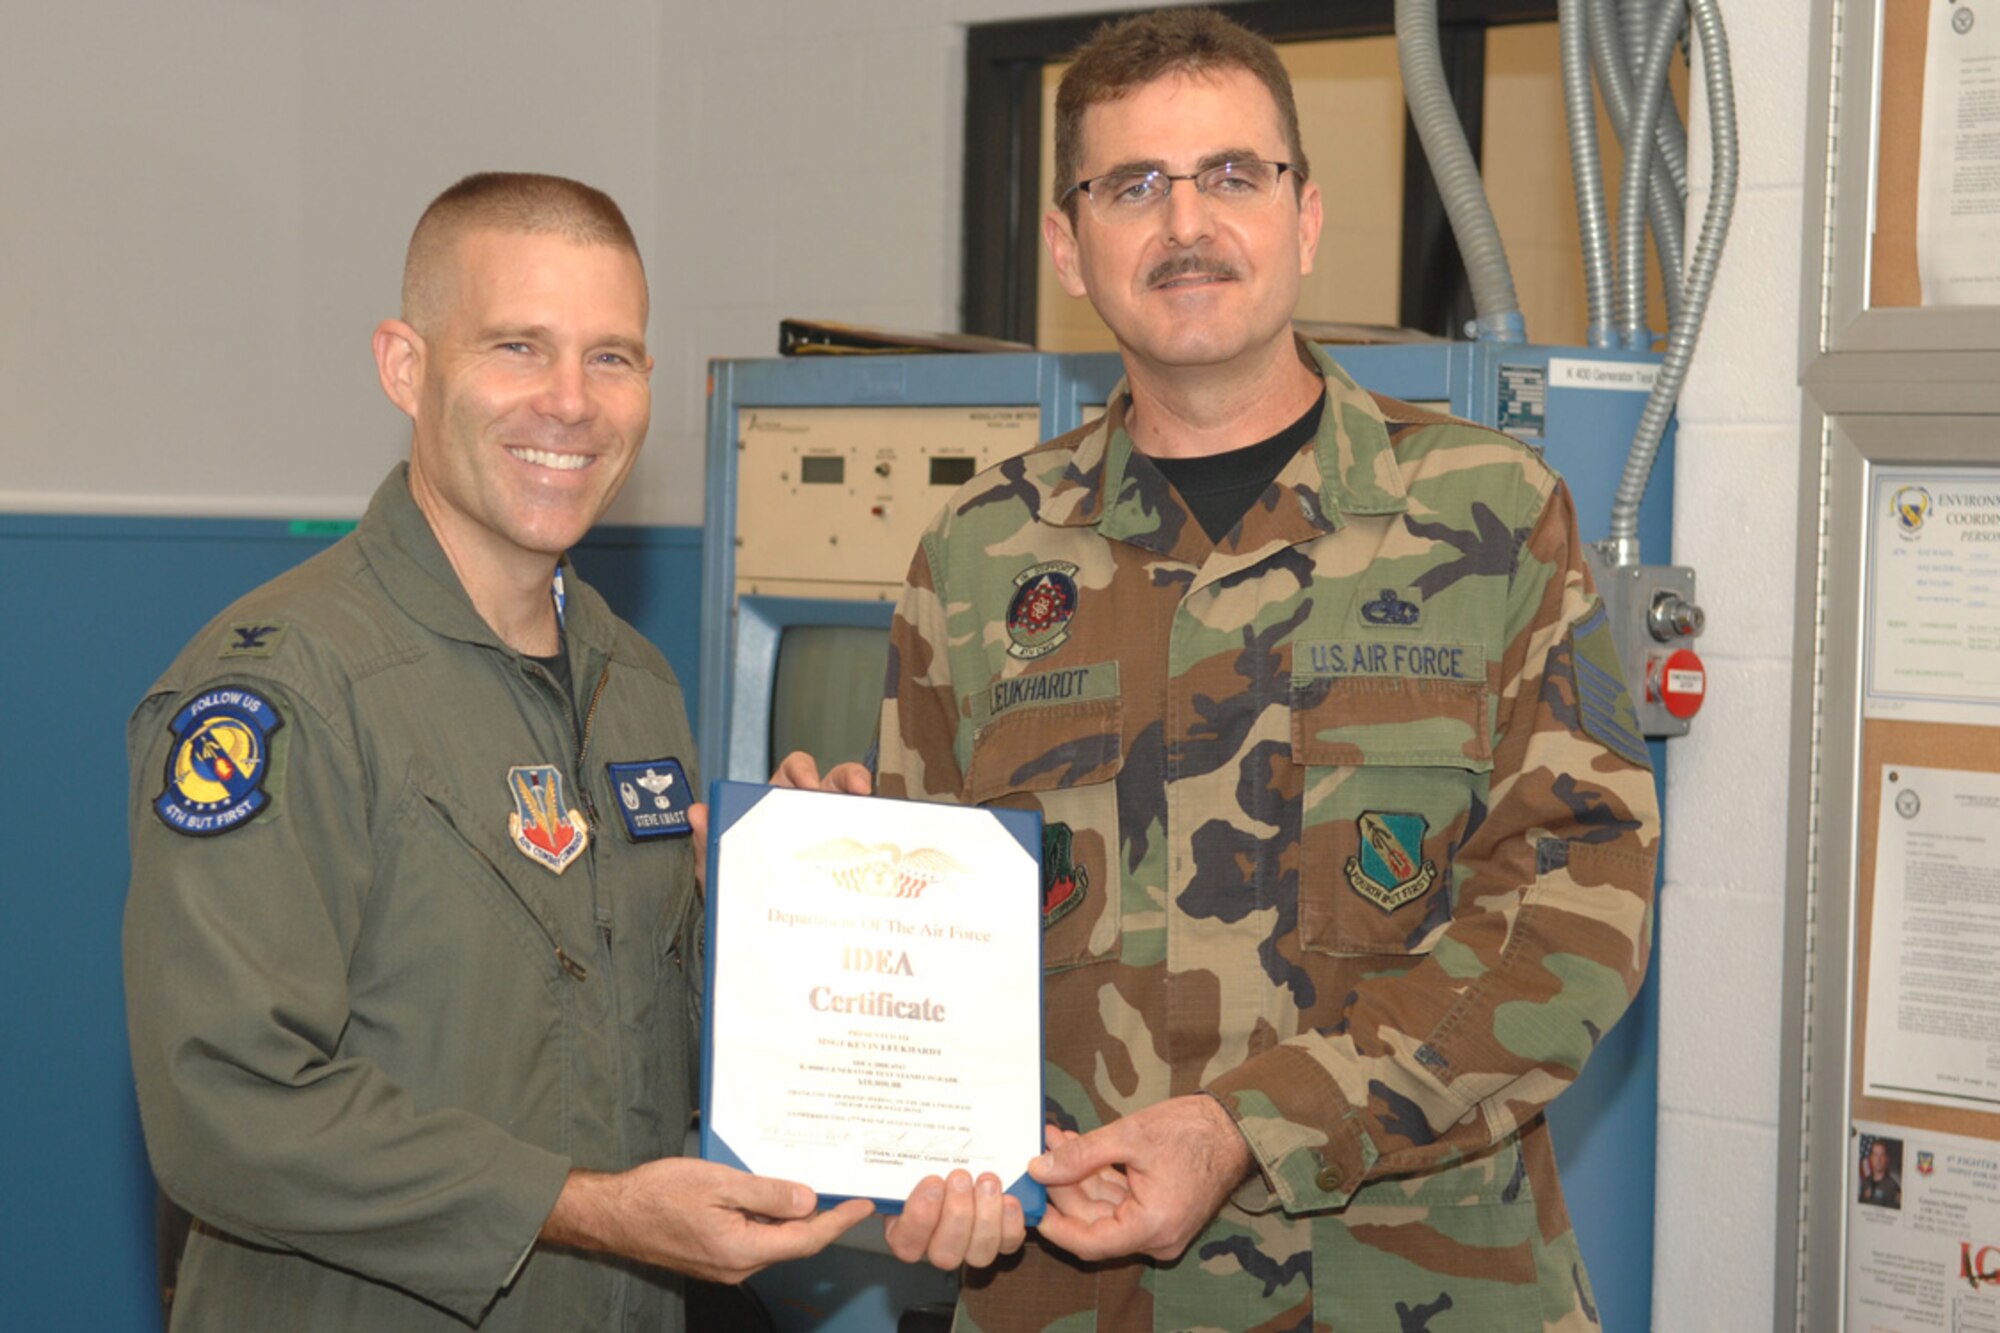 Colonel Steve Kwast, 4th Fighter Wing commander, presents Master Sgt. Kevin Leukhardt, 4th Component Maintenance Squadron,with a certificate of appreciation for coming up with an idea that will save the Air Force roughly $8 million Aug. 27, 2008, on Seymour Johnson Air Force Base, N.C. Sergeant Leukhardt recieved a check for $10,000 through the IDEA Program, which rewards innovation.  (U.S. Air Force photo by Airman 1st Class Gino Reyes) 